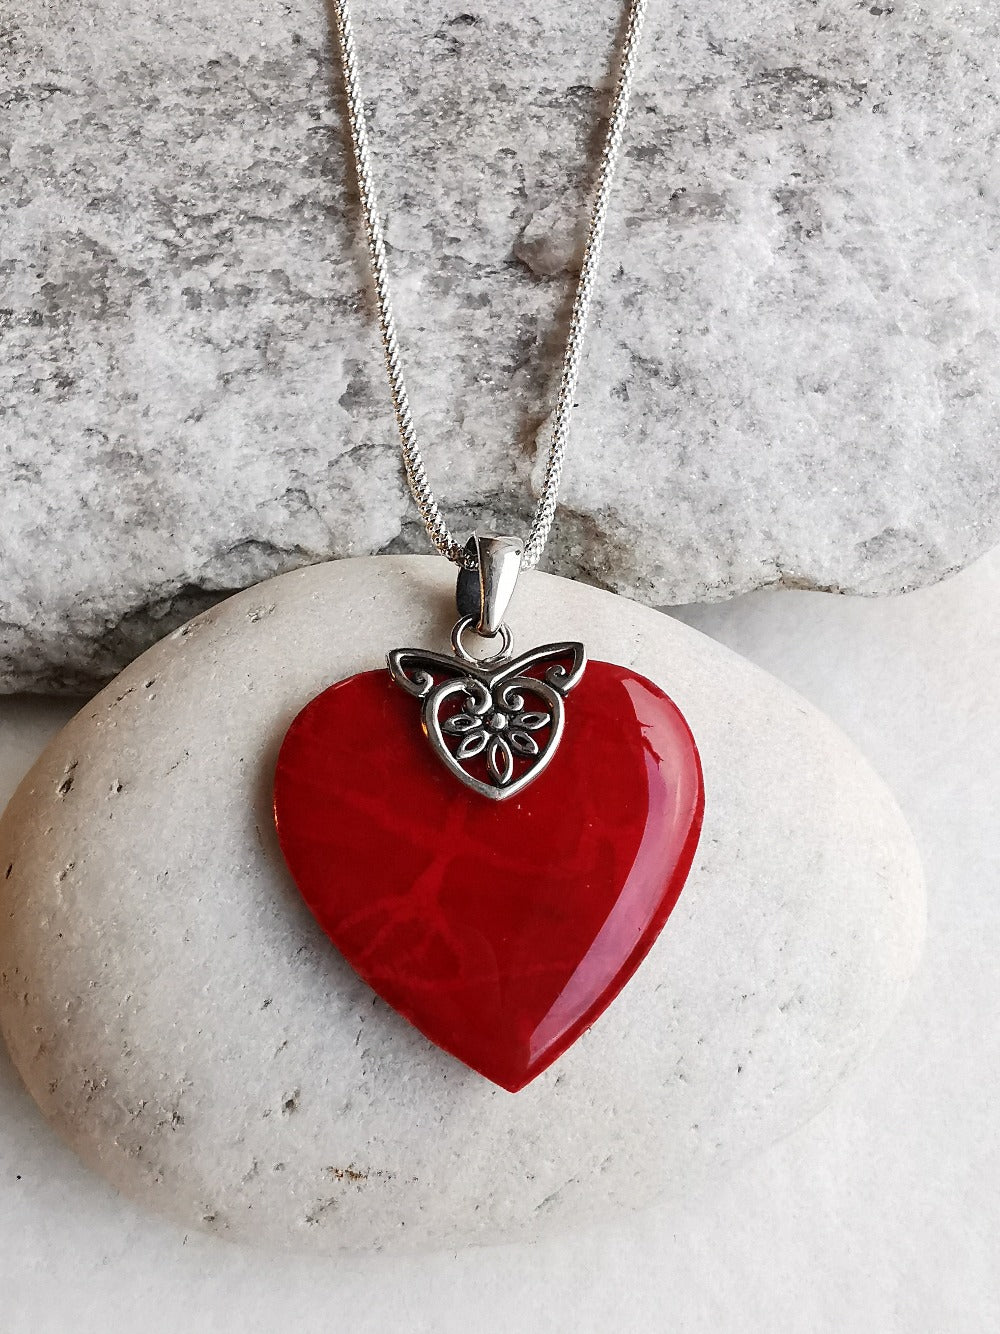 Red Coral Silver Heart Pendant